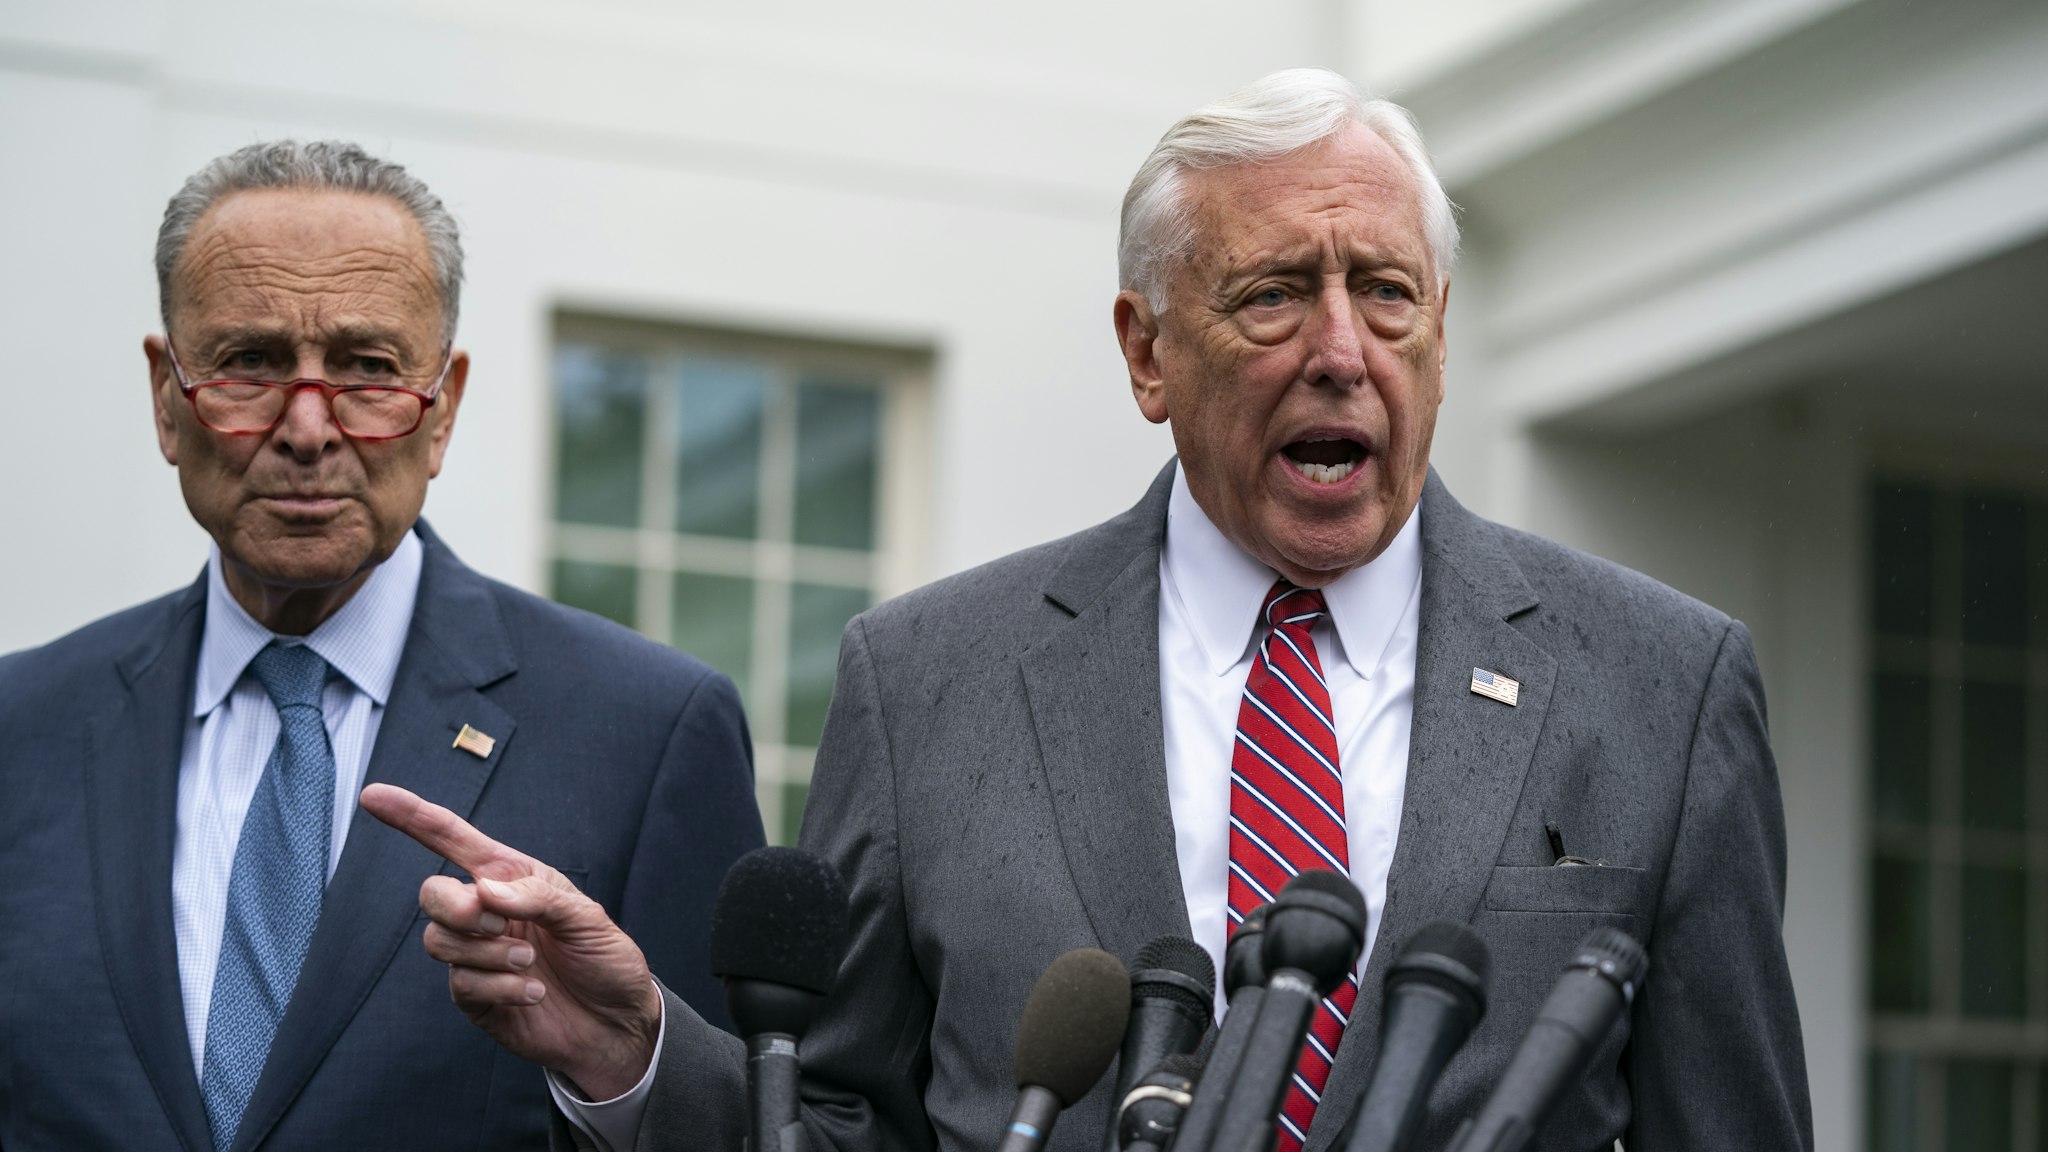 U.S. House Majority Leader Steny Hoyer, a Democrat from Maryland, speaks to members of the media following a meeting at the White House in Washington, D.C., U.S., on Wednesday, Oct. 16, 2019. A White House meeting between President Donald Trump and congressional leaders to discuss the situation with Turkey and Syria broke up amid insults and arguments, Democratic leaders said. Photographer: Alex Edelman/Bloomberg via Getty Images